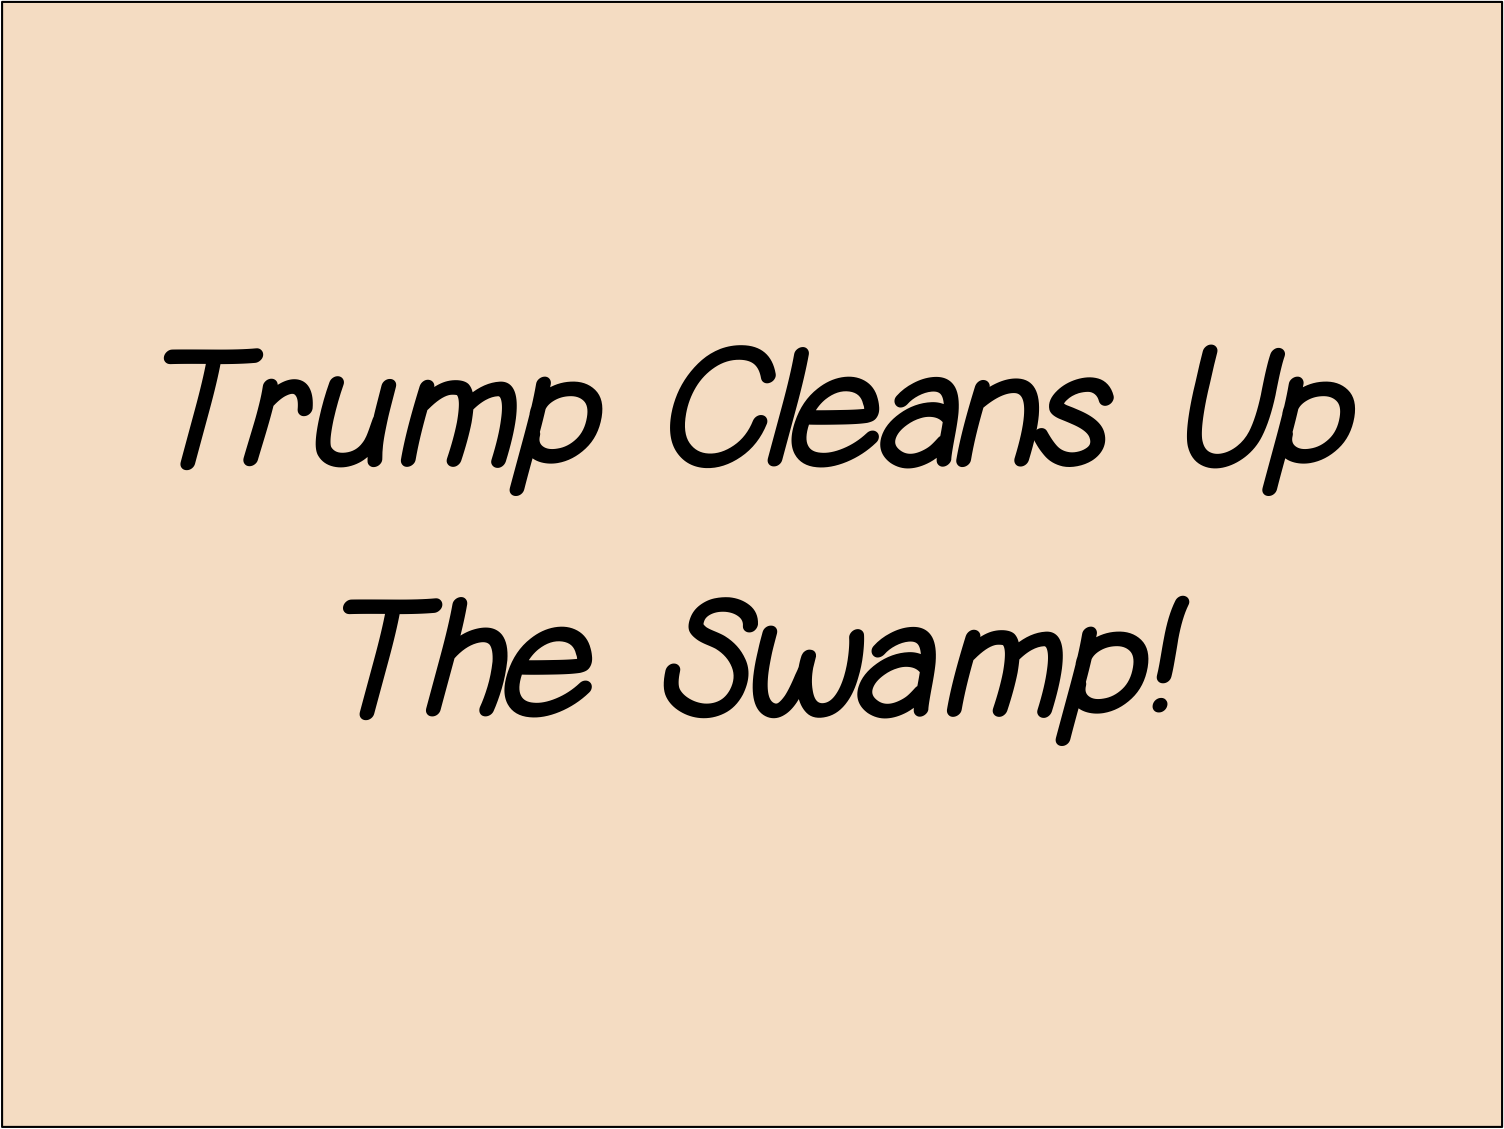 Trump Cleans Up The Swamp